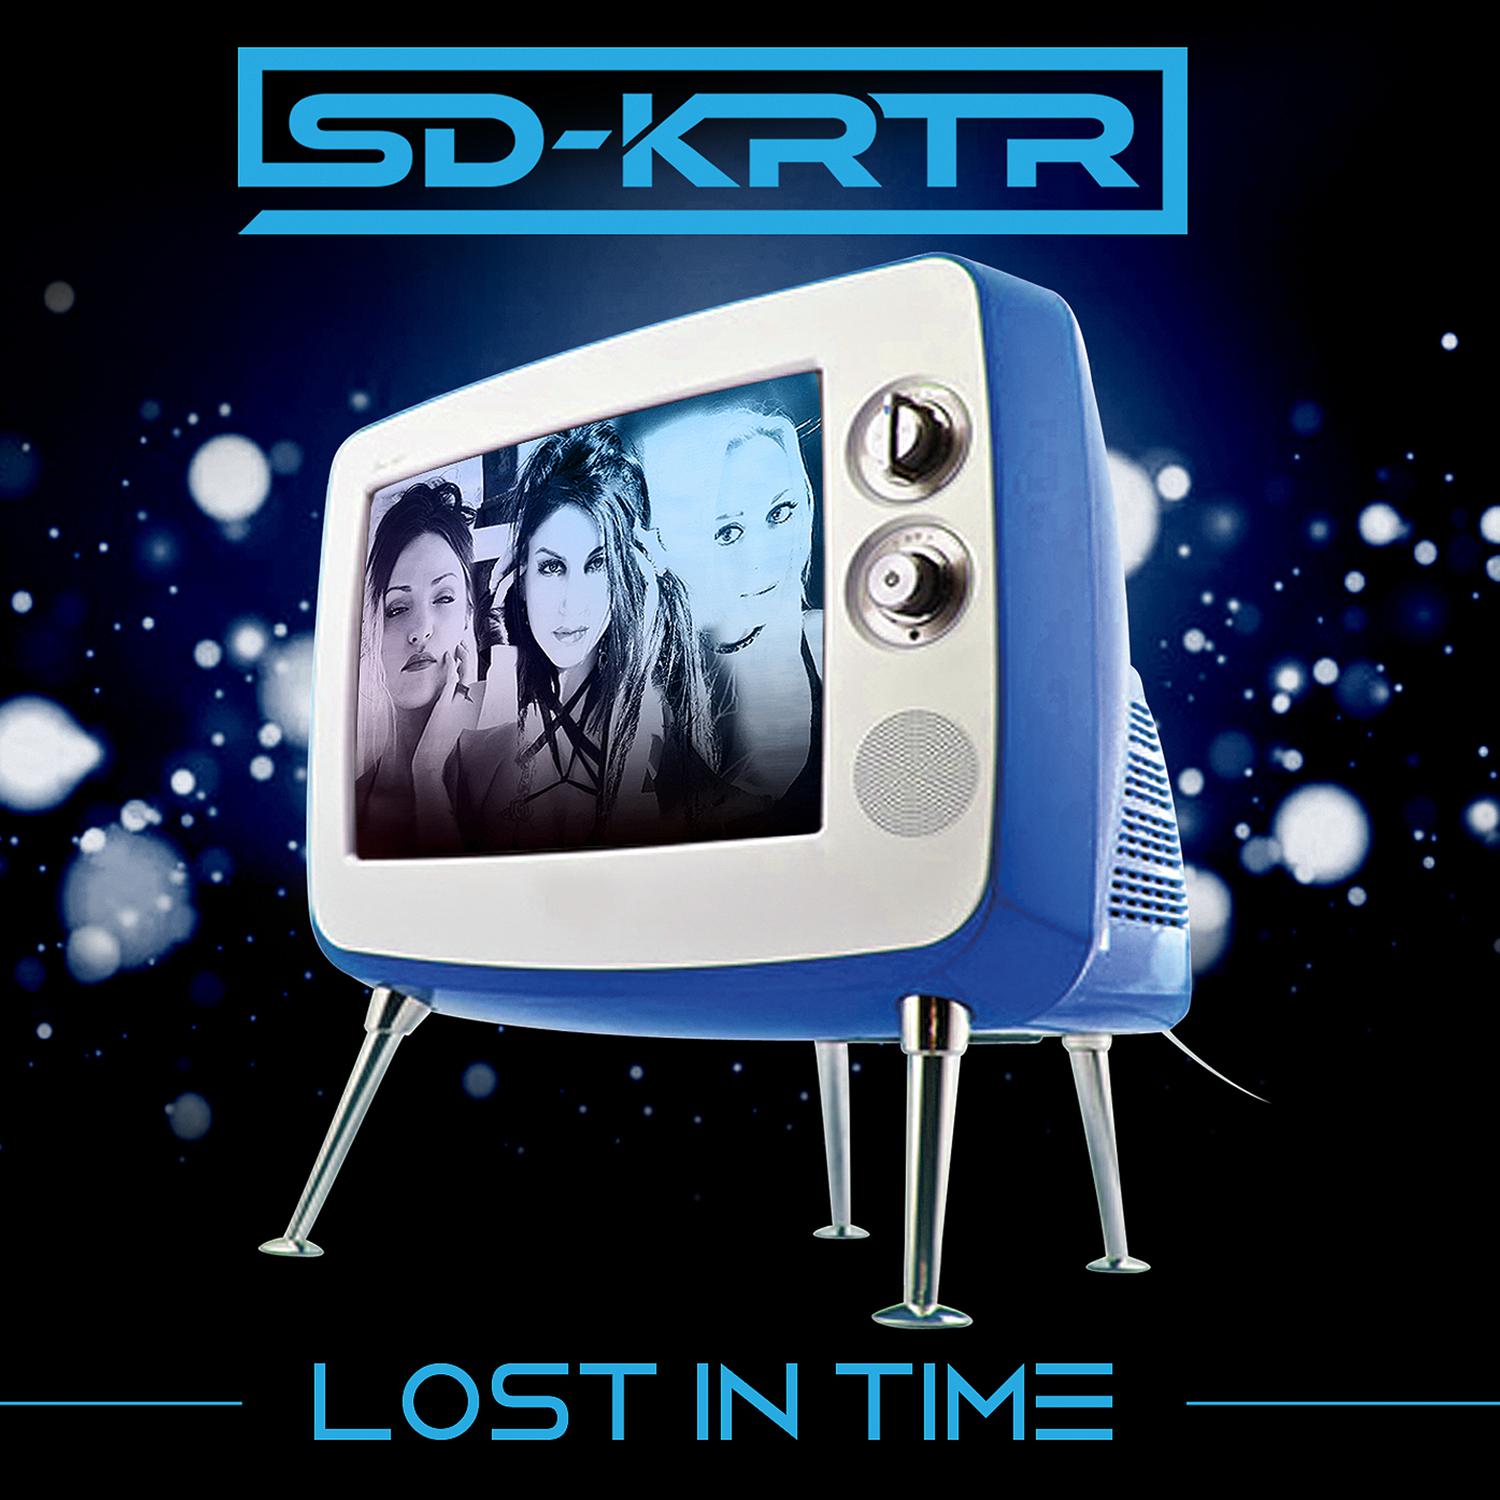 SD-Krtr - A Thought Lost in Time